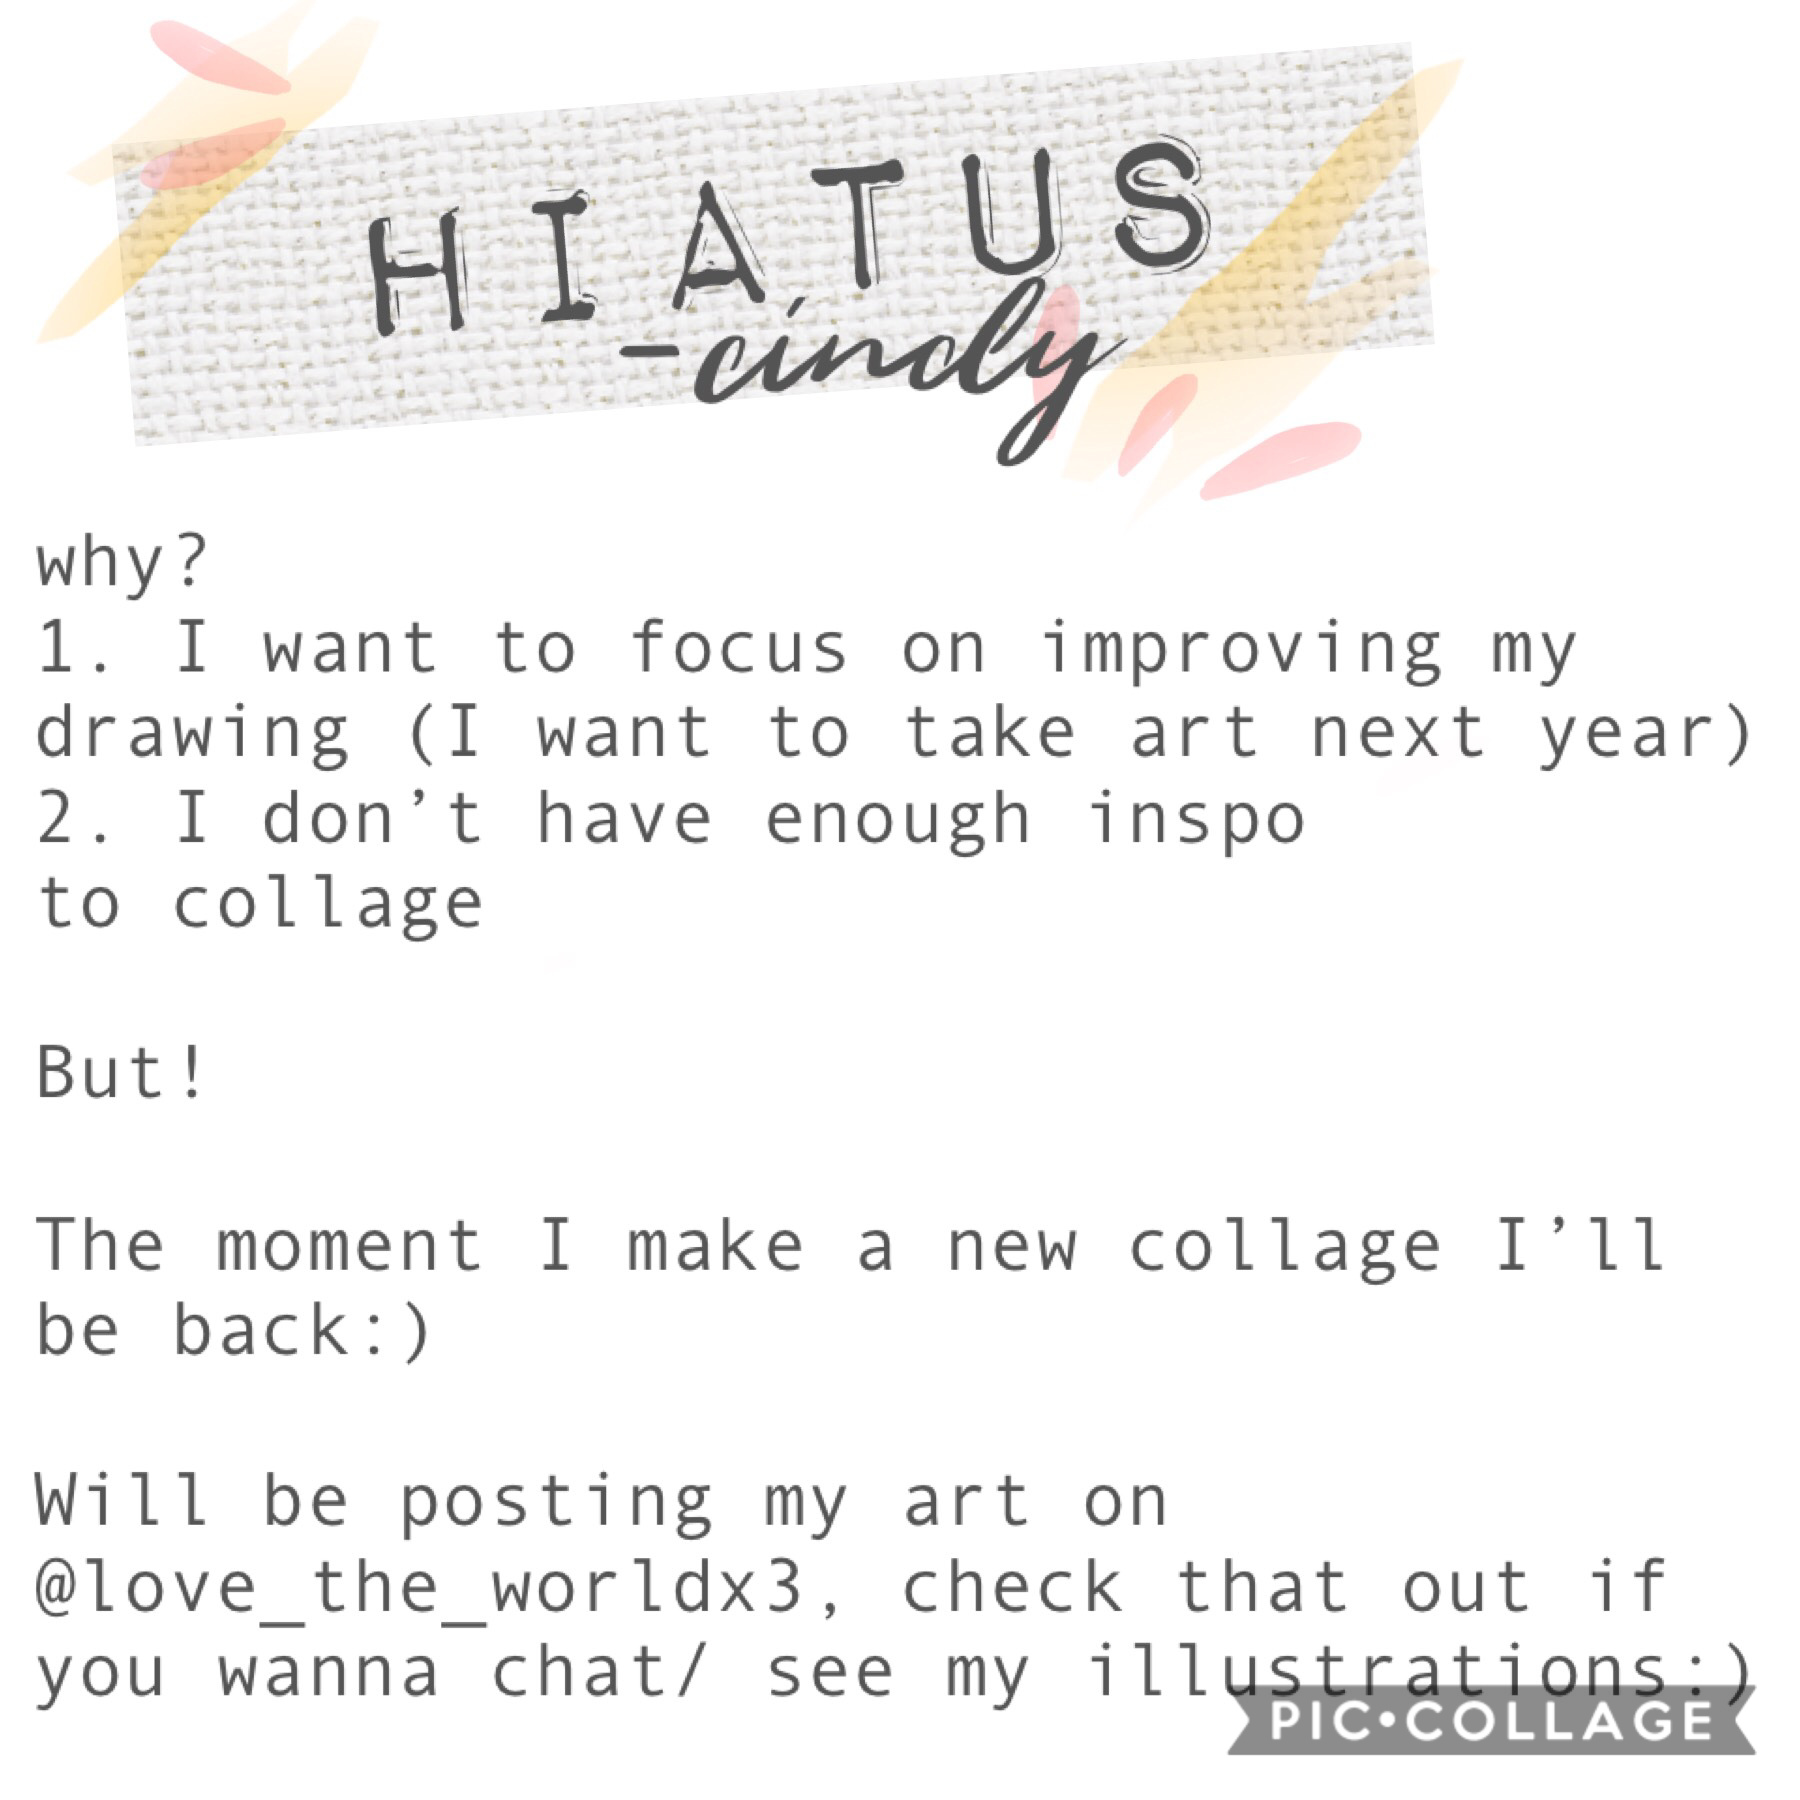 Link to my other acc will be in the comments! See y’all soon :))

Just want to say but I am by no means leaving. Just taking a short break to regain inspiration :) don’t wanna come back half-ássed hahaha